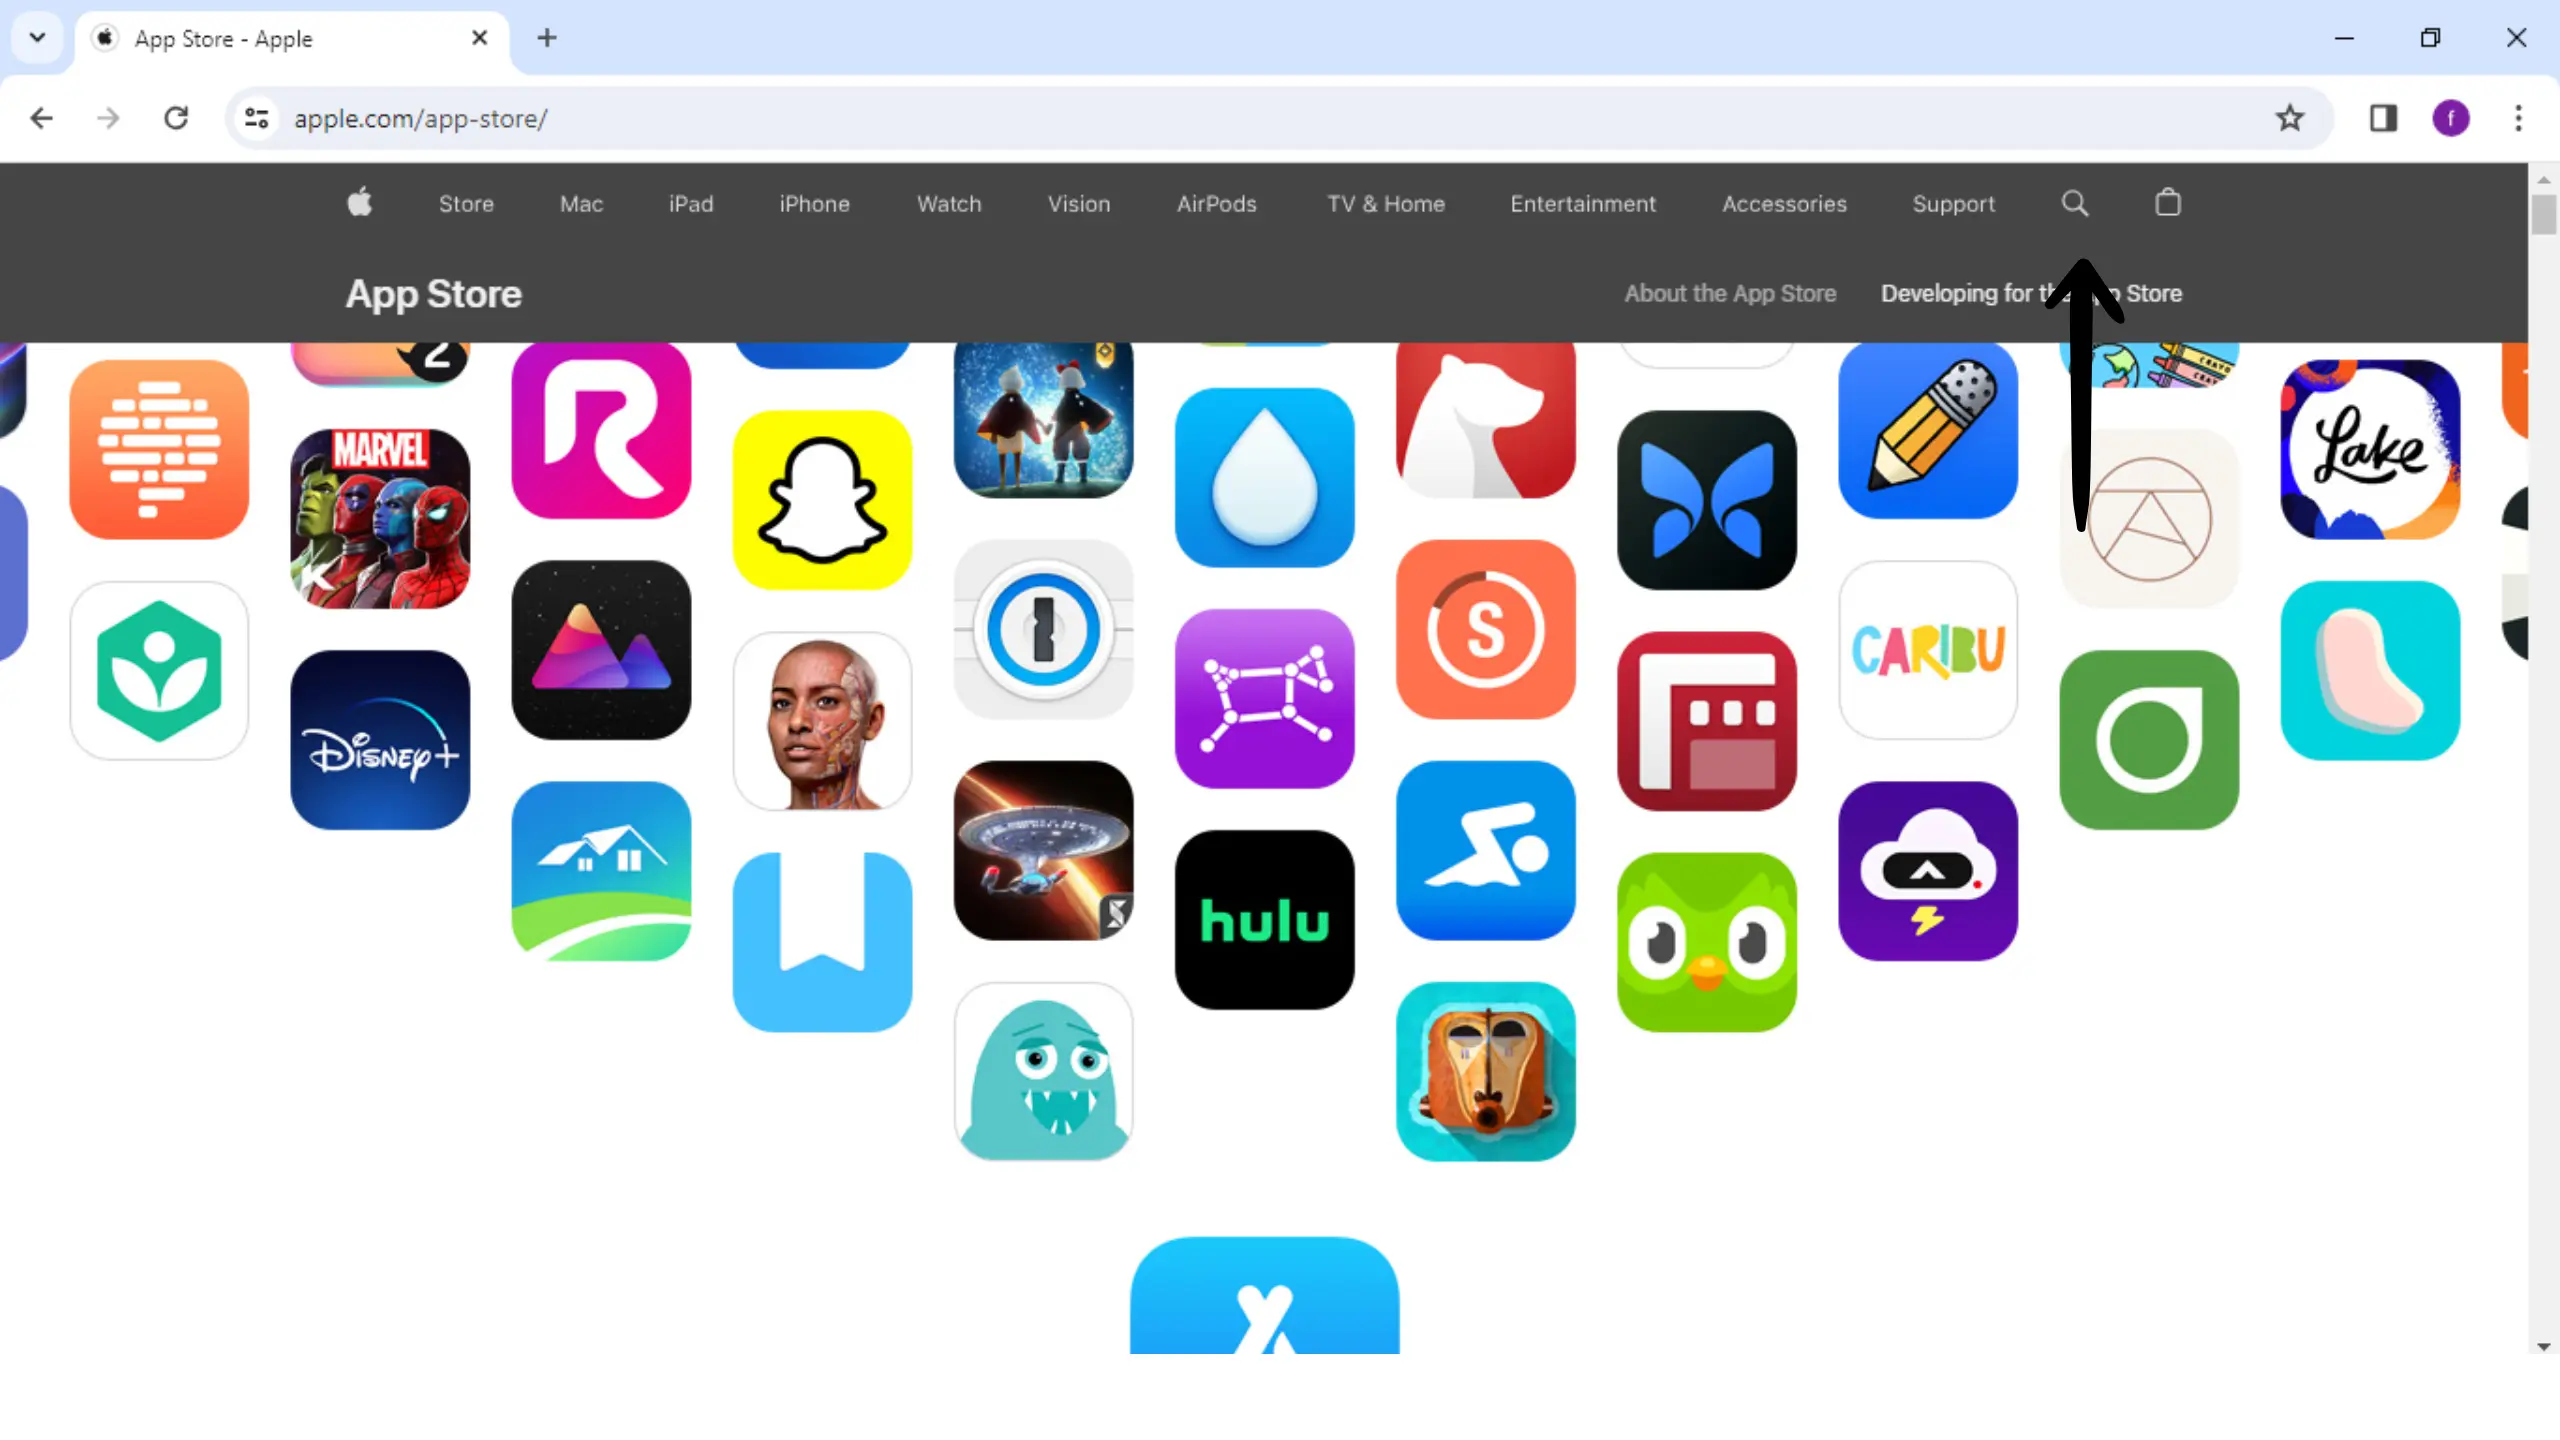 App Store Home